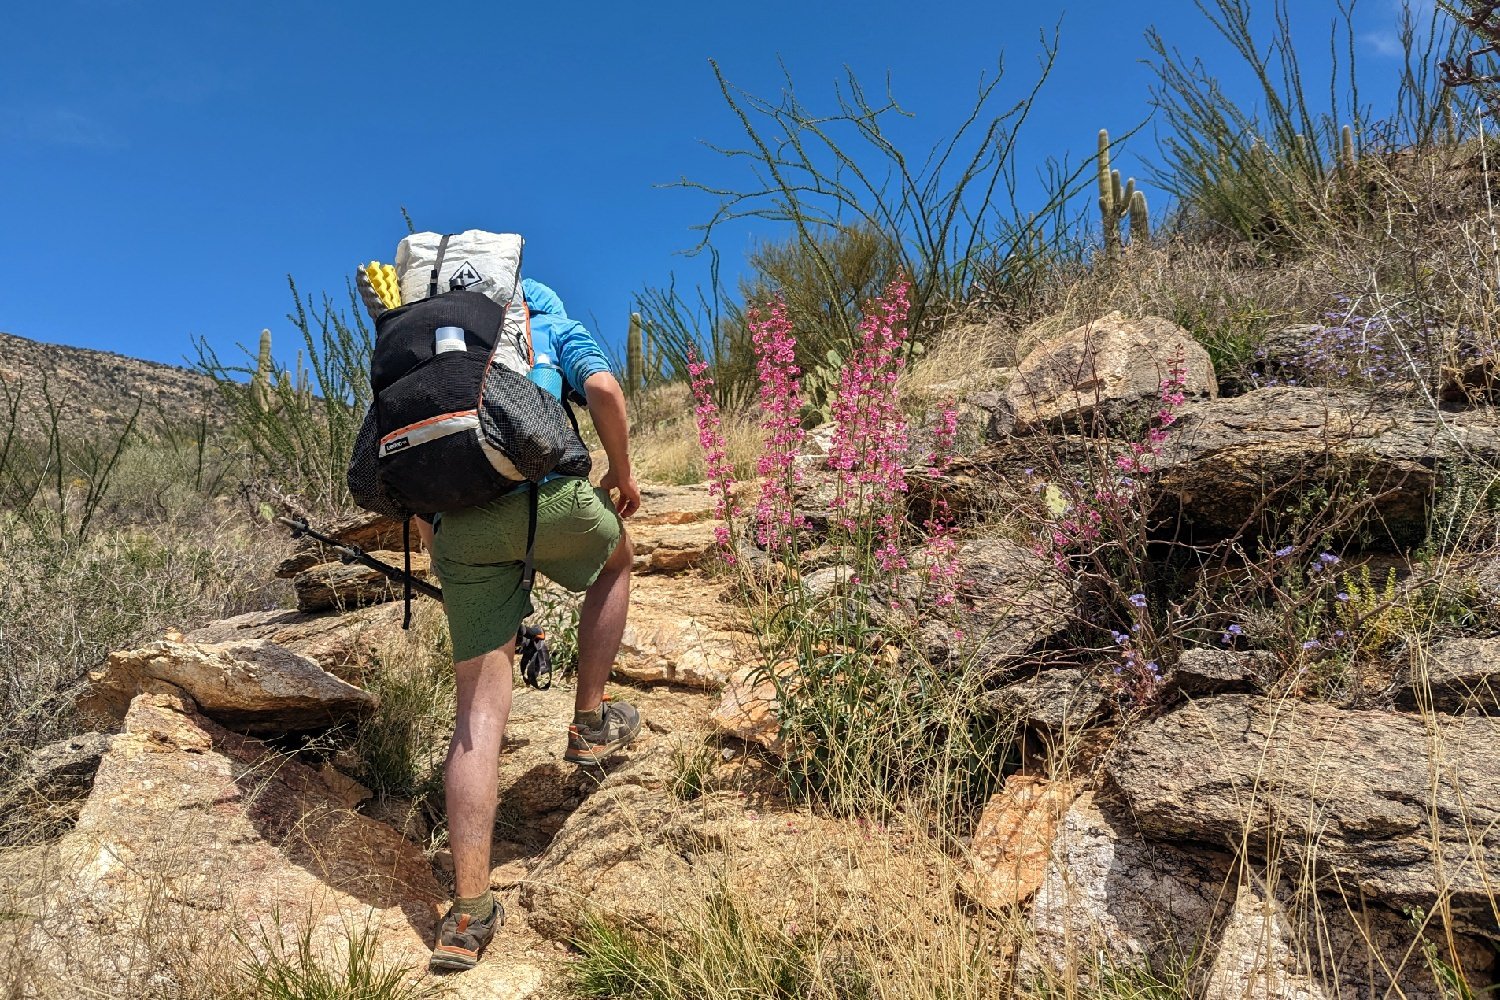 A hiker wearing the Hyperlite Mountain Gear Unbound 40 scrambling up some rocks on a desert trail with blooming flowers and cacti around him